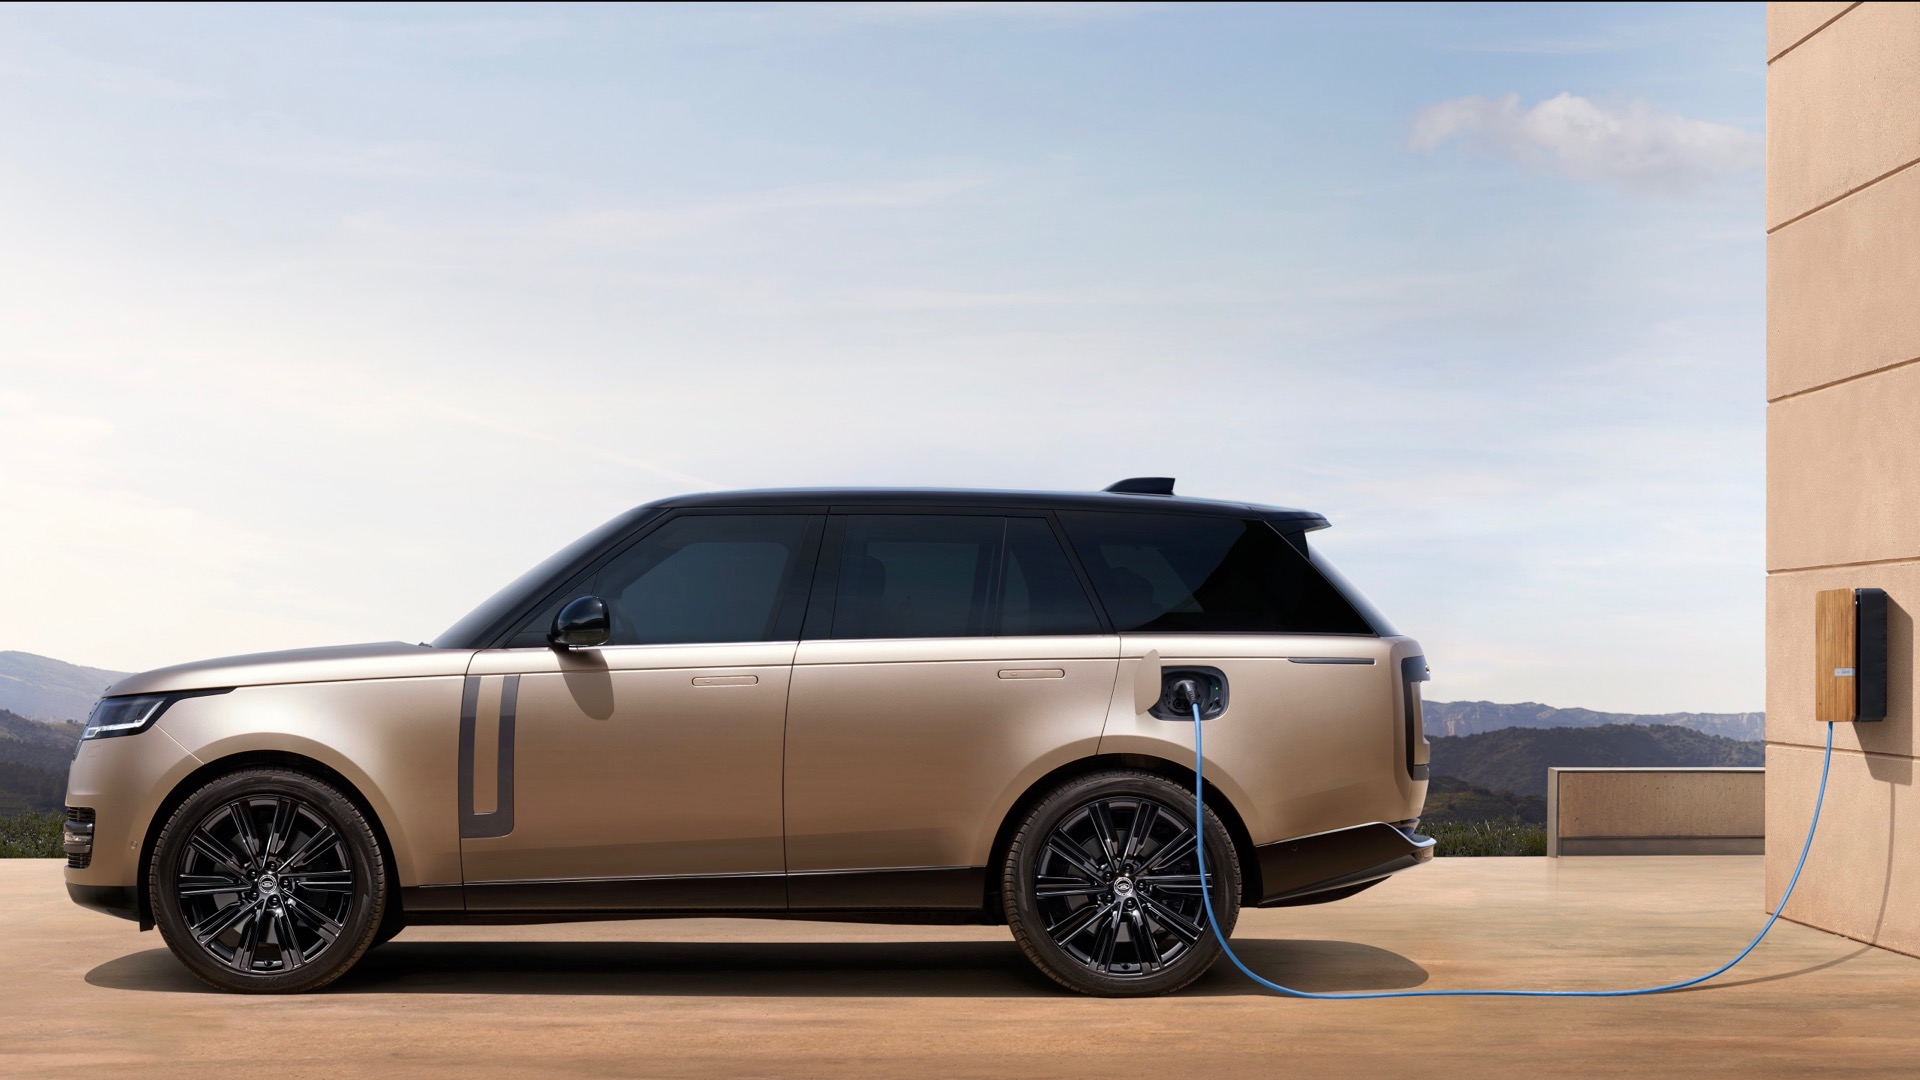 Preview 2023 Land Rover Range Rover SV offers new level of